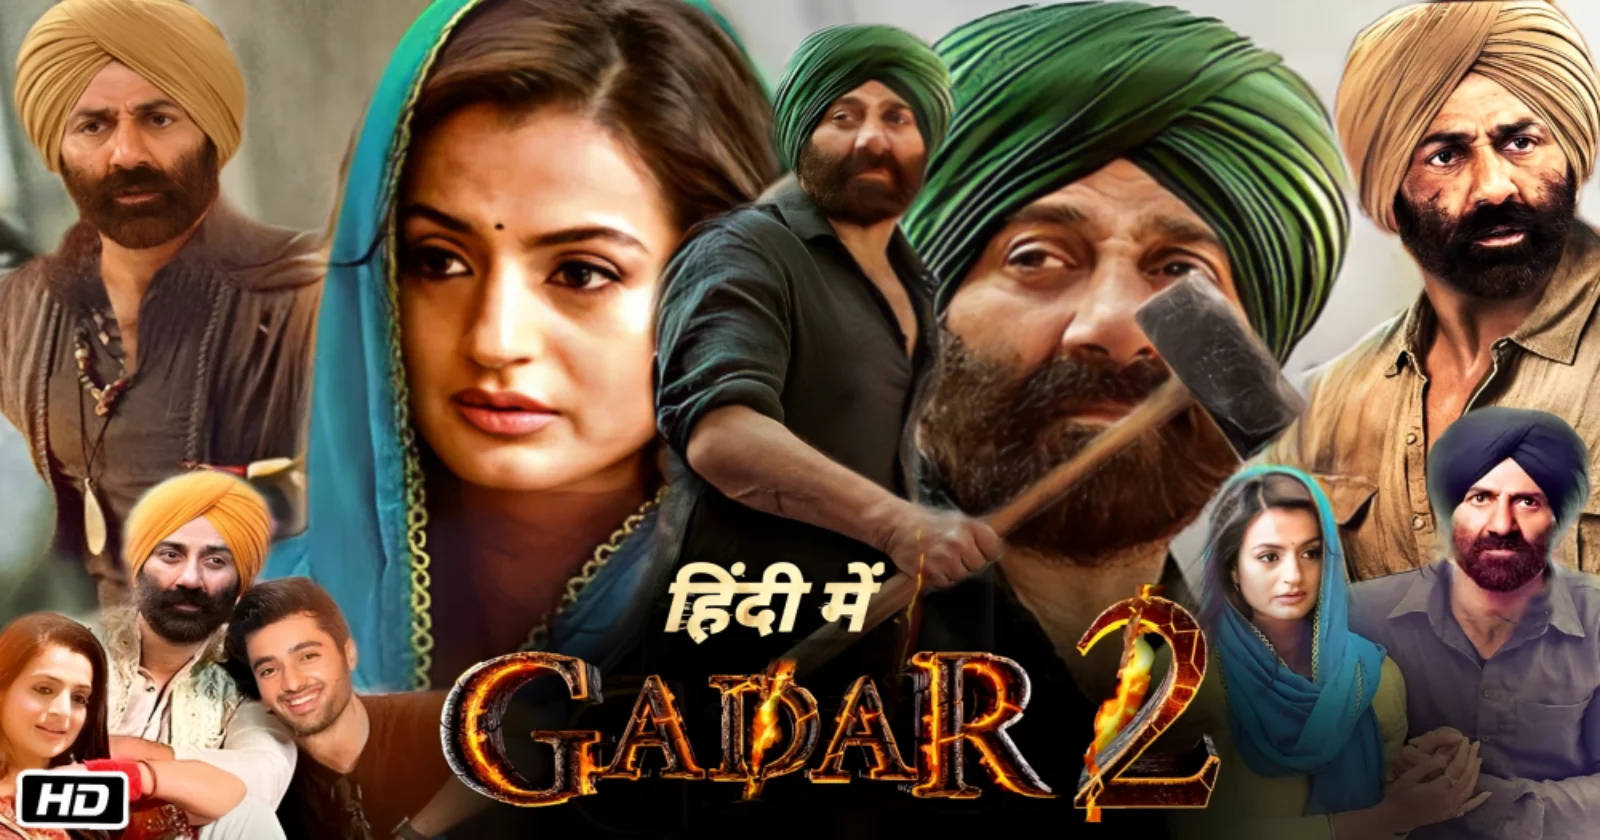 Gadar 2 movie story and release date